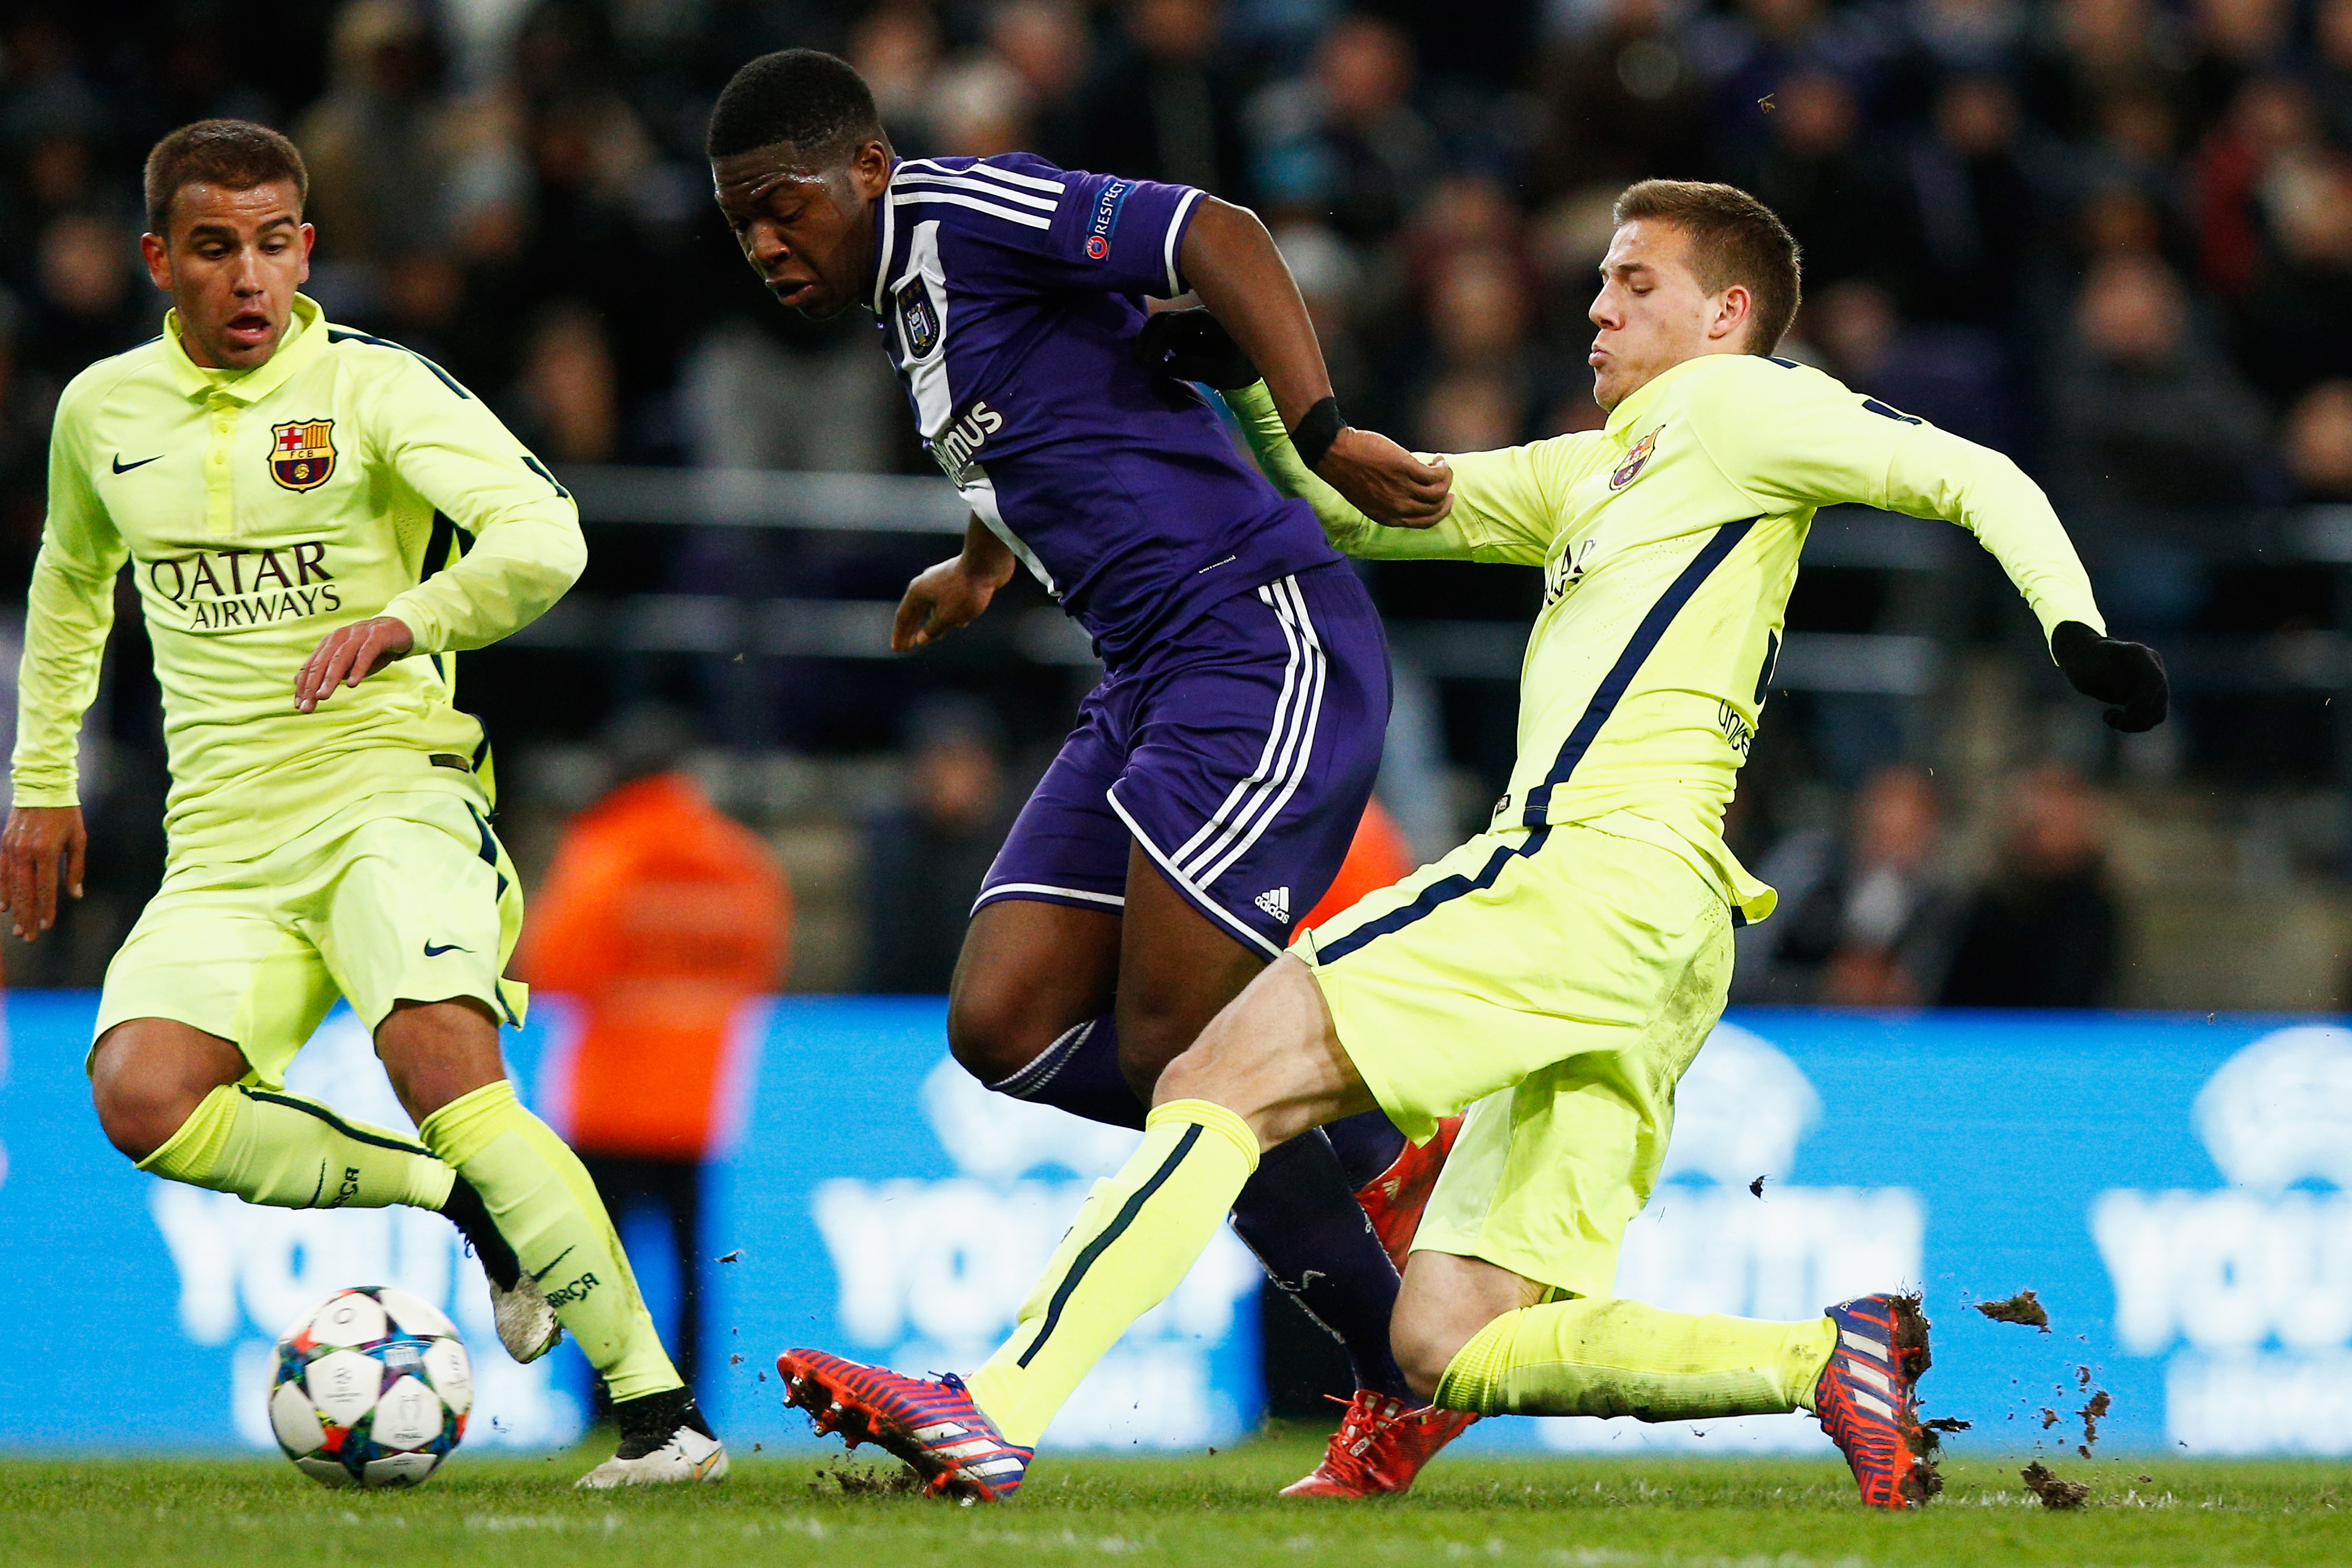 BRUSSELS, BELGIUM - FEBRUARY 23:  Aaron Leya Iseka of Anderlecht is tackled by Juanma Garcia (L) and Rodri Tarin (R) of Barcelona during the UEFA Youth League Round of 16 match between RSC Anderlecht and FC Barcelona held at Constant Vanden Stock Stadium on February 23, 2015 in Brussels, Belgium.  (Photo by Dean Mouhtaropoulos/Getty Images)